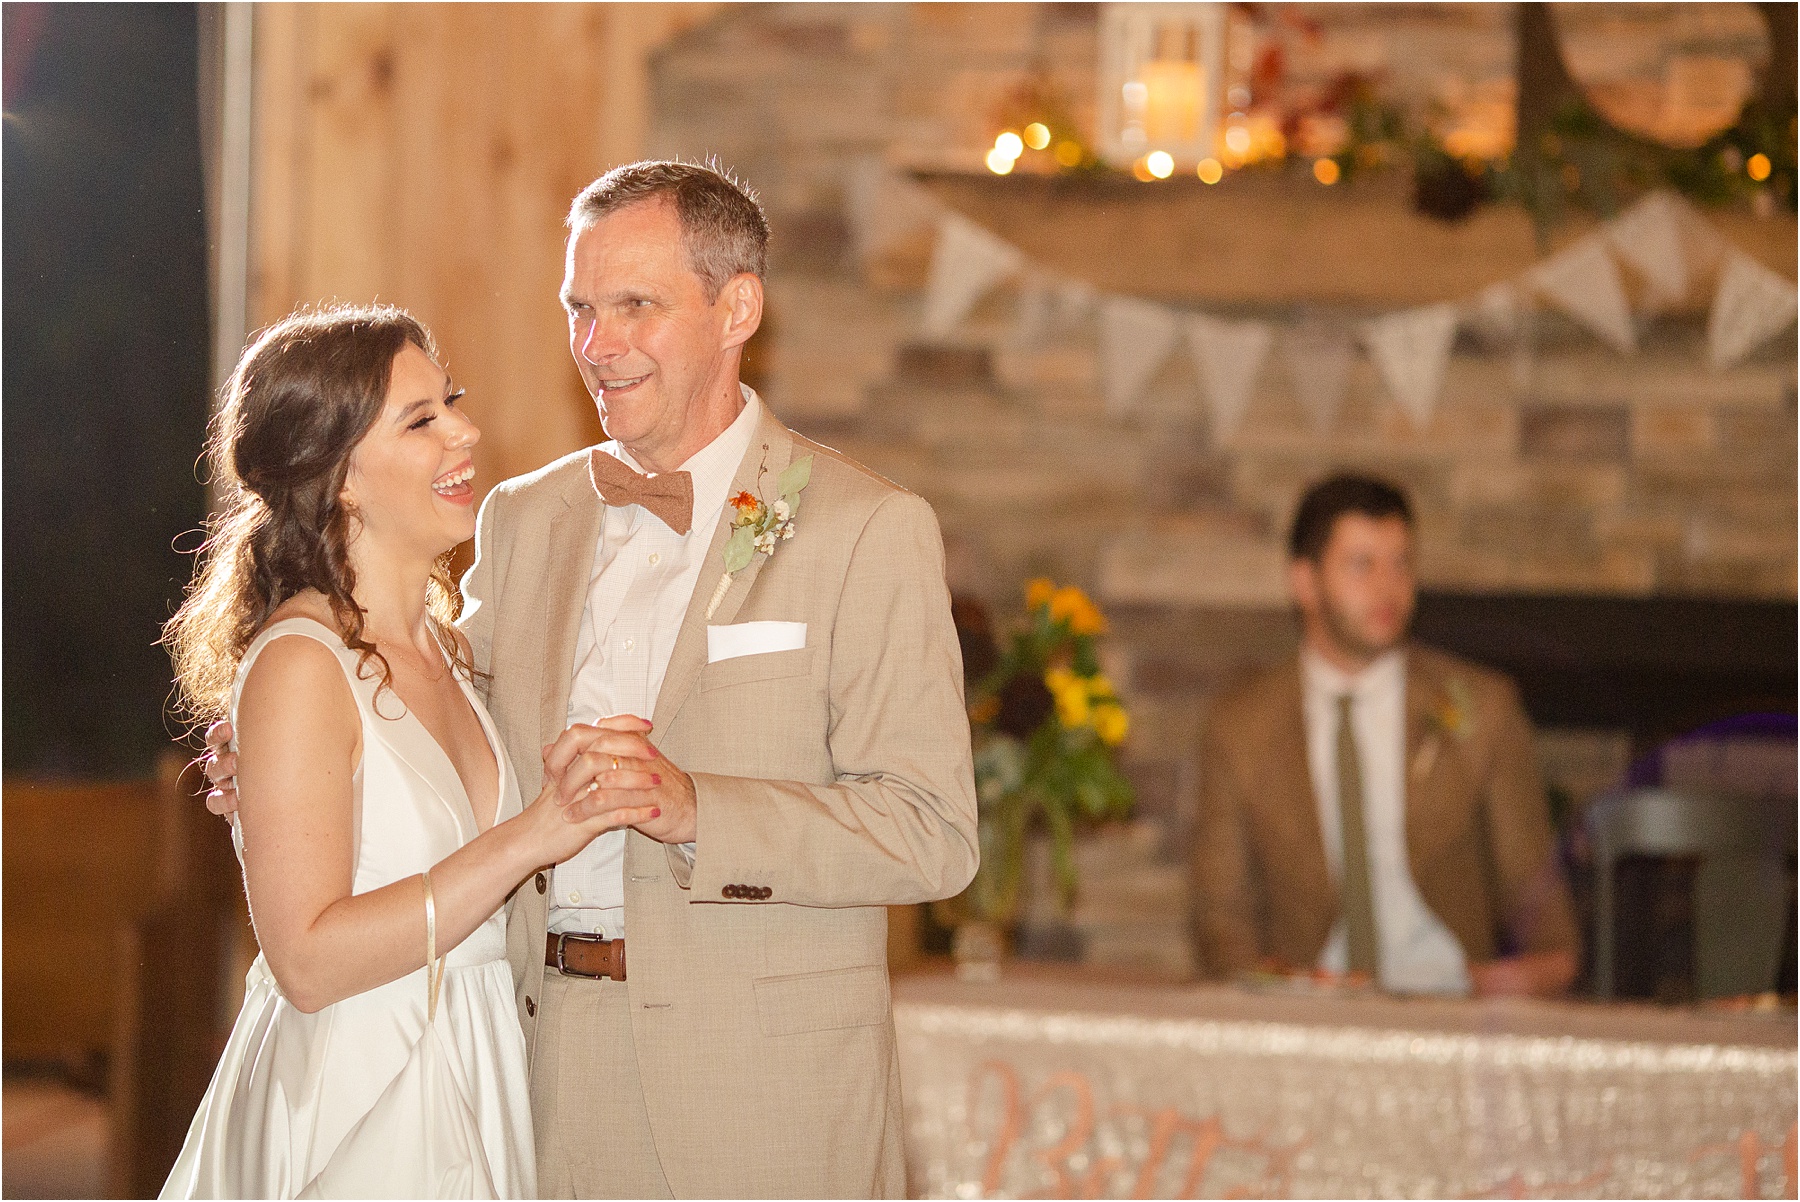 Dad in tan suit dancing with his daughter in a wedding dress